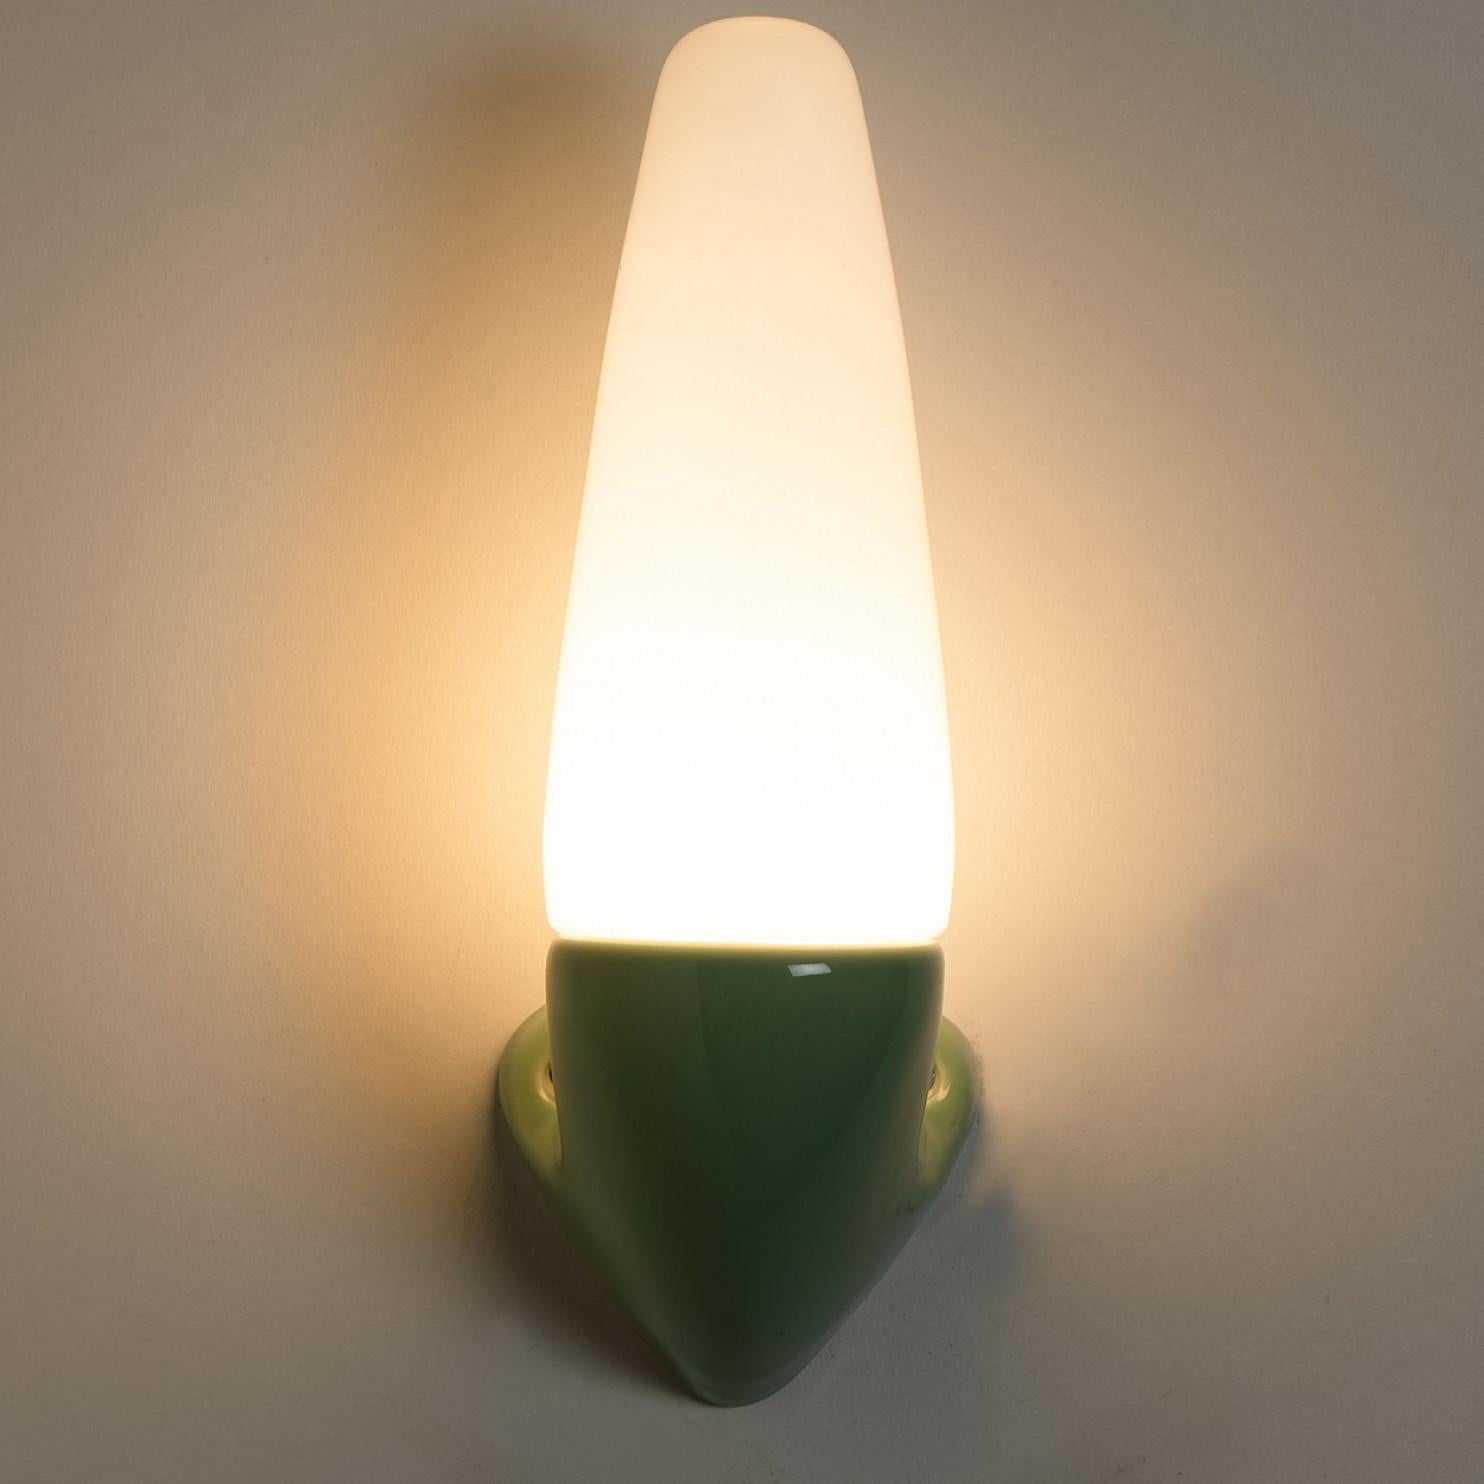 Pair of Green Ceramic Wall Lights, Sigvard Bernadotte, 1970 For Sale 1